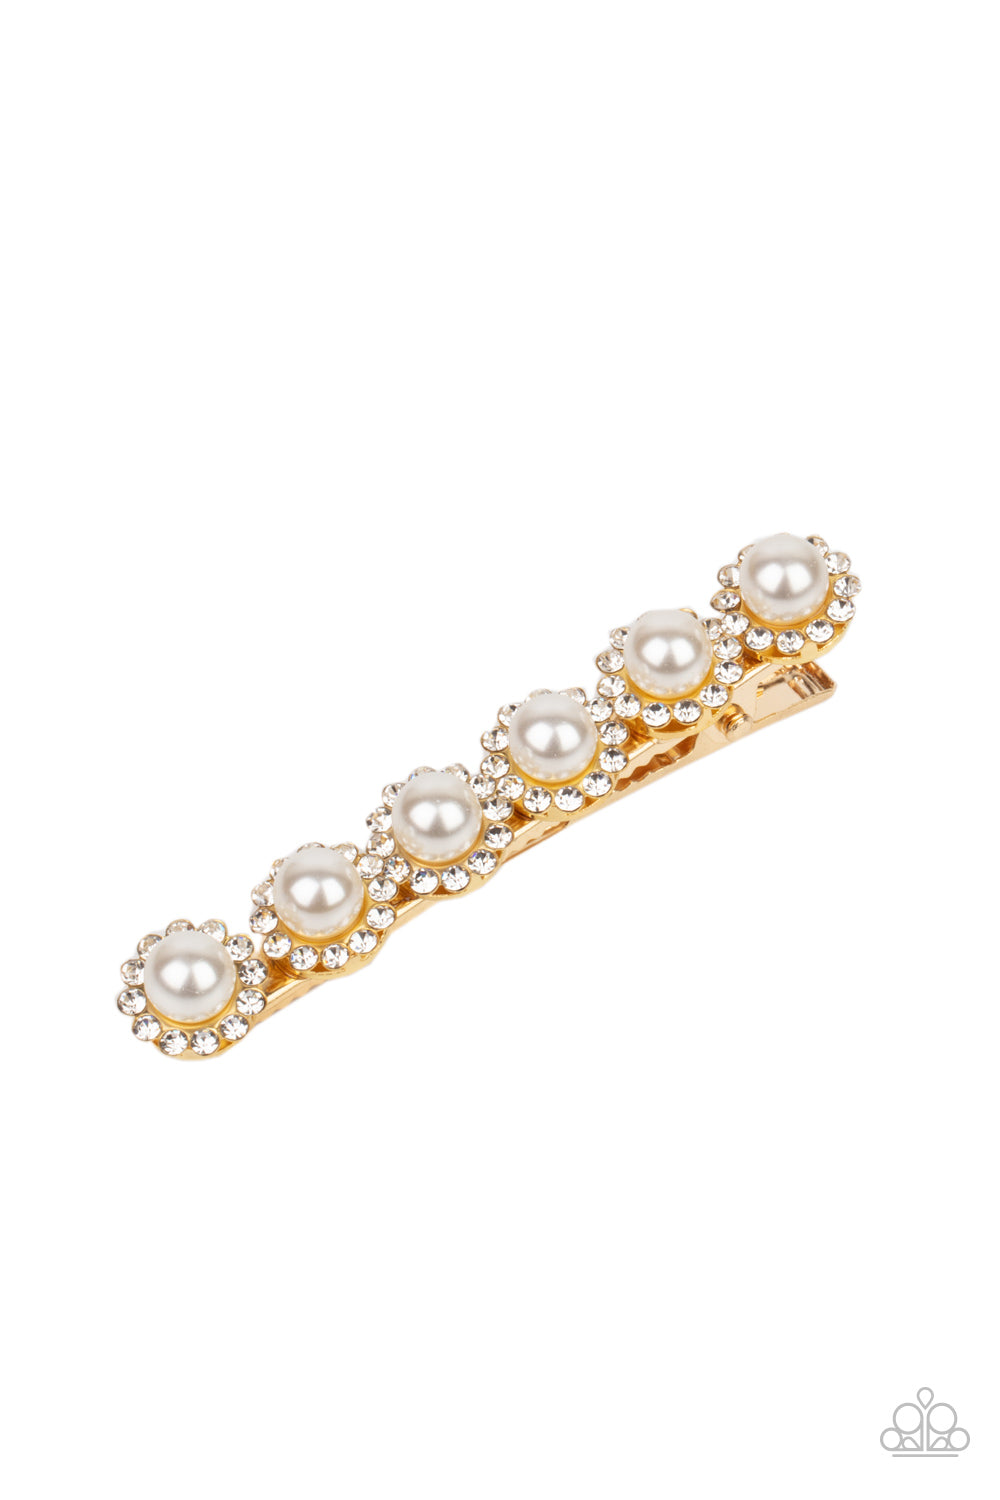 Polished Posh Paparazzi Accessories Hair Clip - Gold